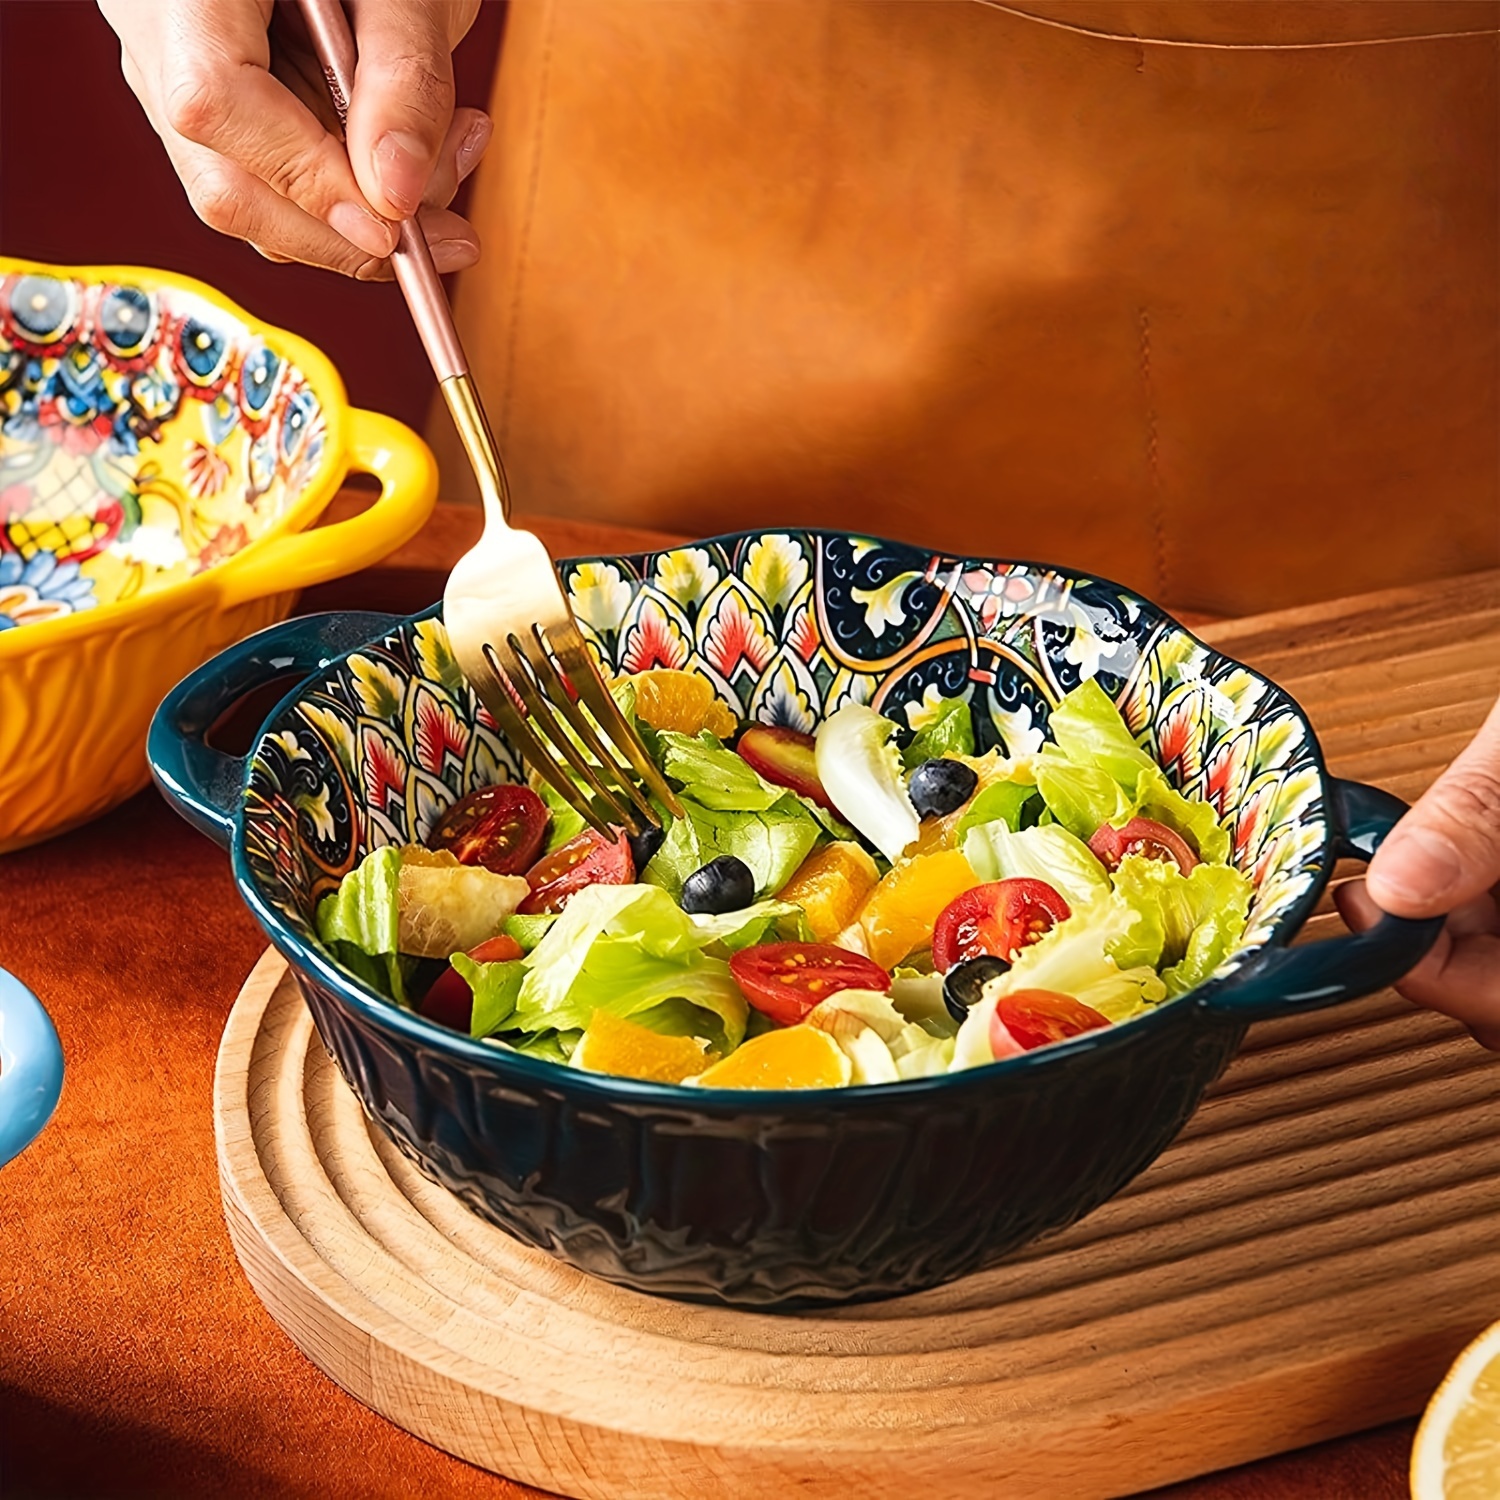 

2-piece Set 9.45" Colorful Ceramic Bowls With Dual Handles - Microwave Safe, Perfect For Salads, Soups & Ramen - Ideal For Home Kitchen & Restaurant Use